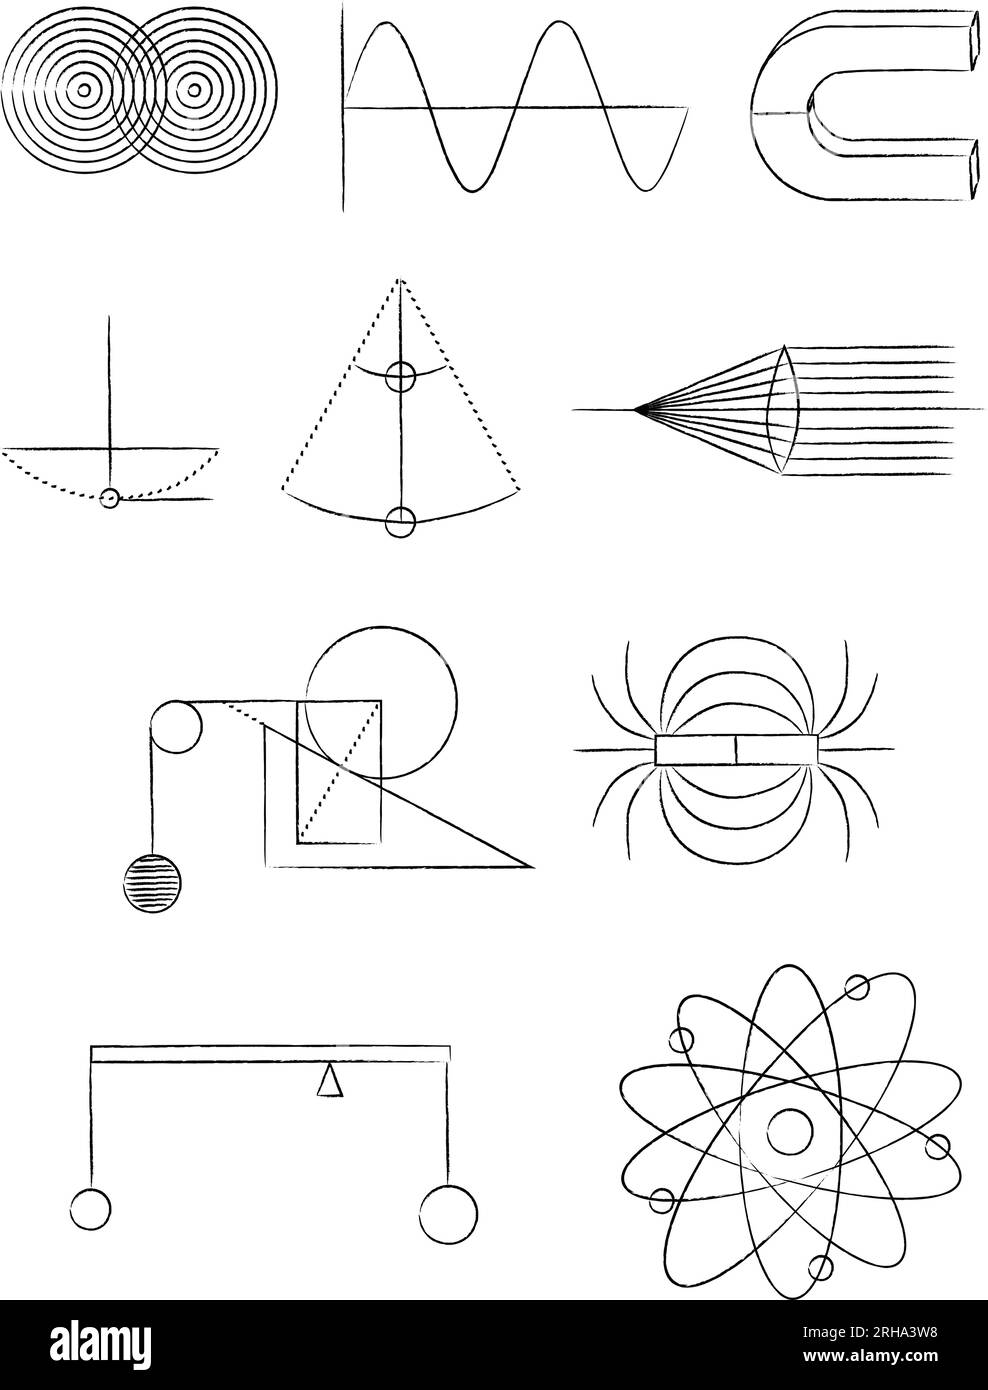 Physics doodles. Scientific drawings isolated on white background Stock Vector